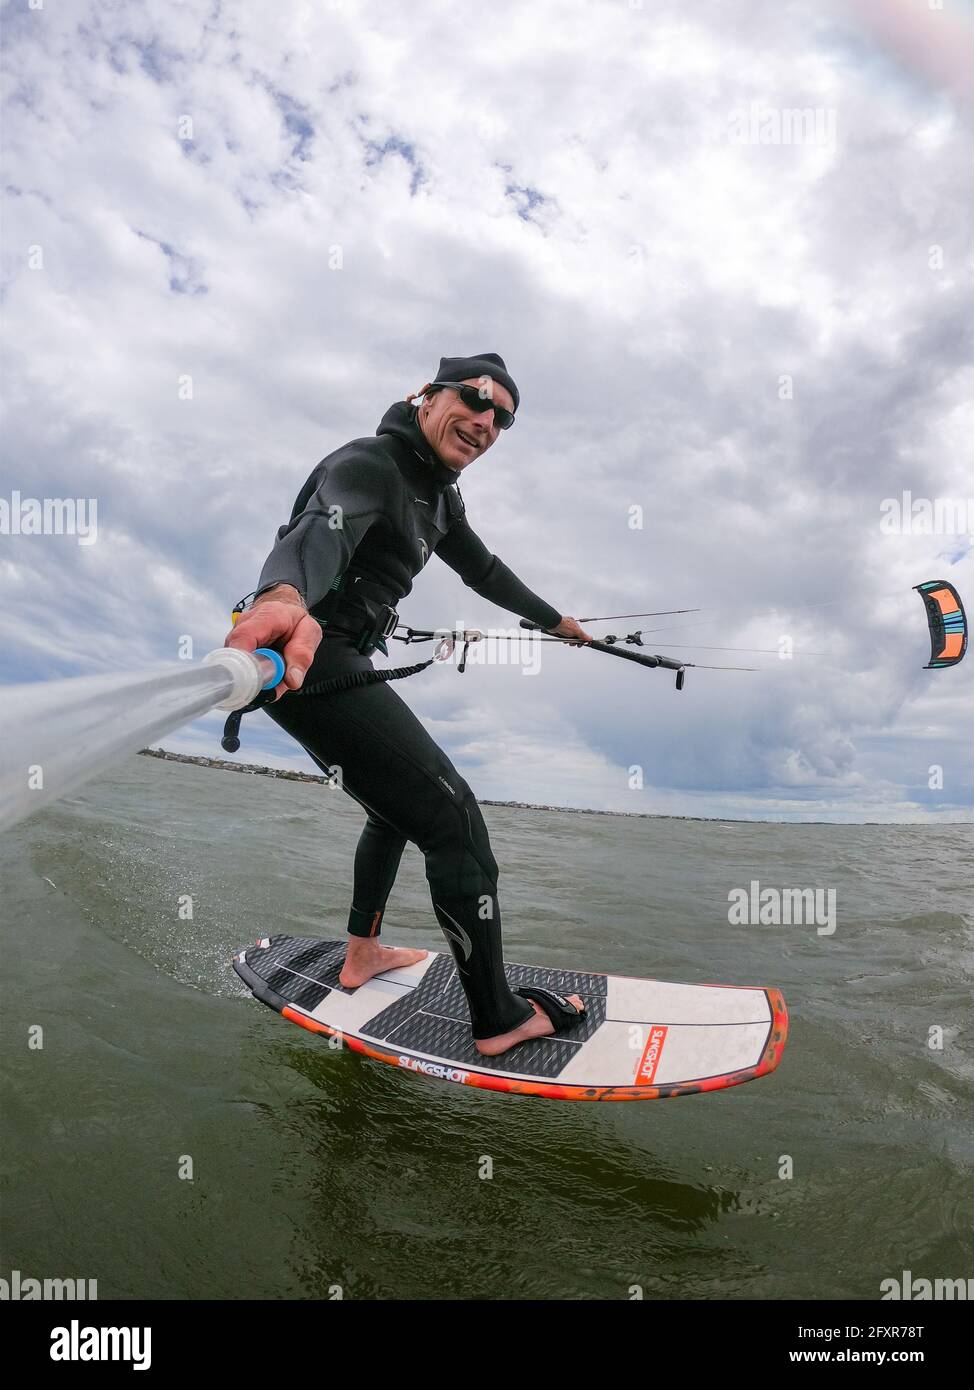 Photographer Skip Brown on his foiling kiteboard on the Pamlico Sound, Nags Head, North Carolina, United States of America, North America Stock Photo